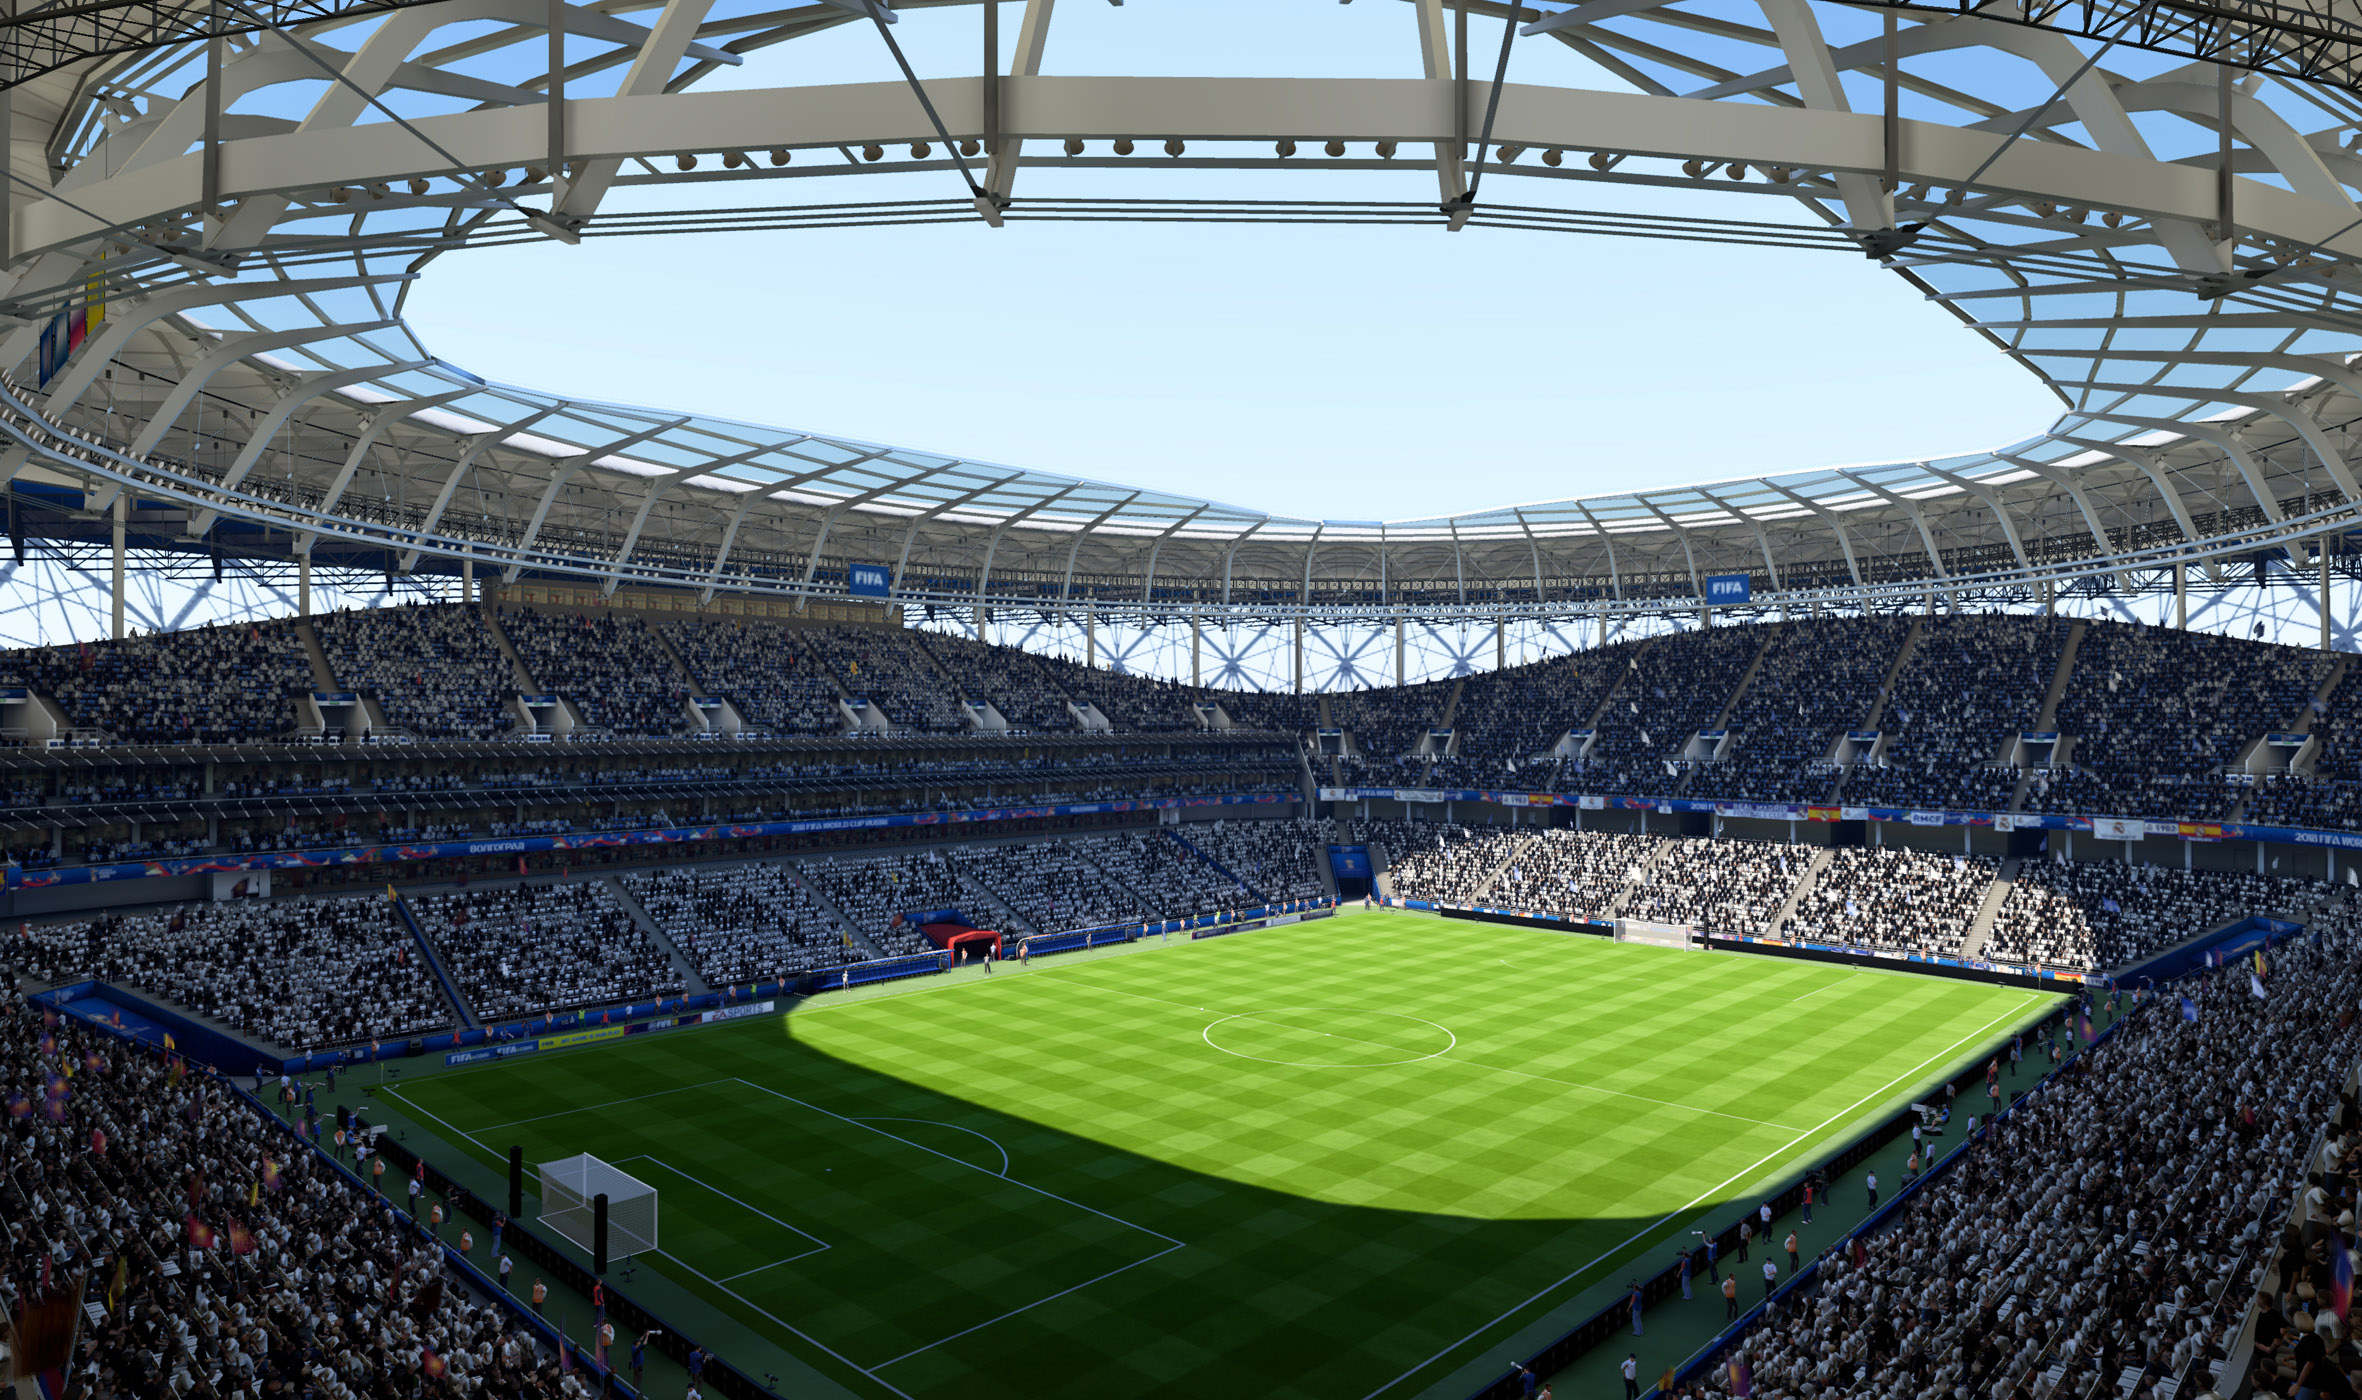 Volgograd Stadium realtime render in Frostbite engineVolgograd Stadium realtime render in Frostbite engine. Stadium lead; proxy modeled entire stadium, modelled final roof elements amoung other pieces. Mentored junior staff anf provided quality guidance.